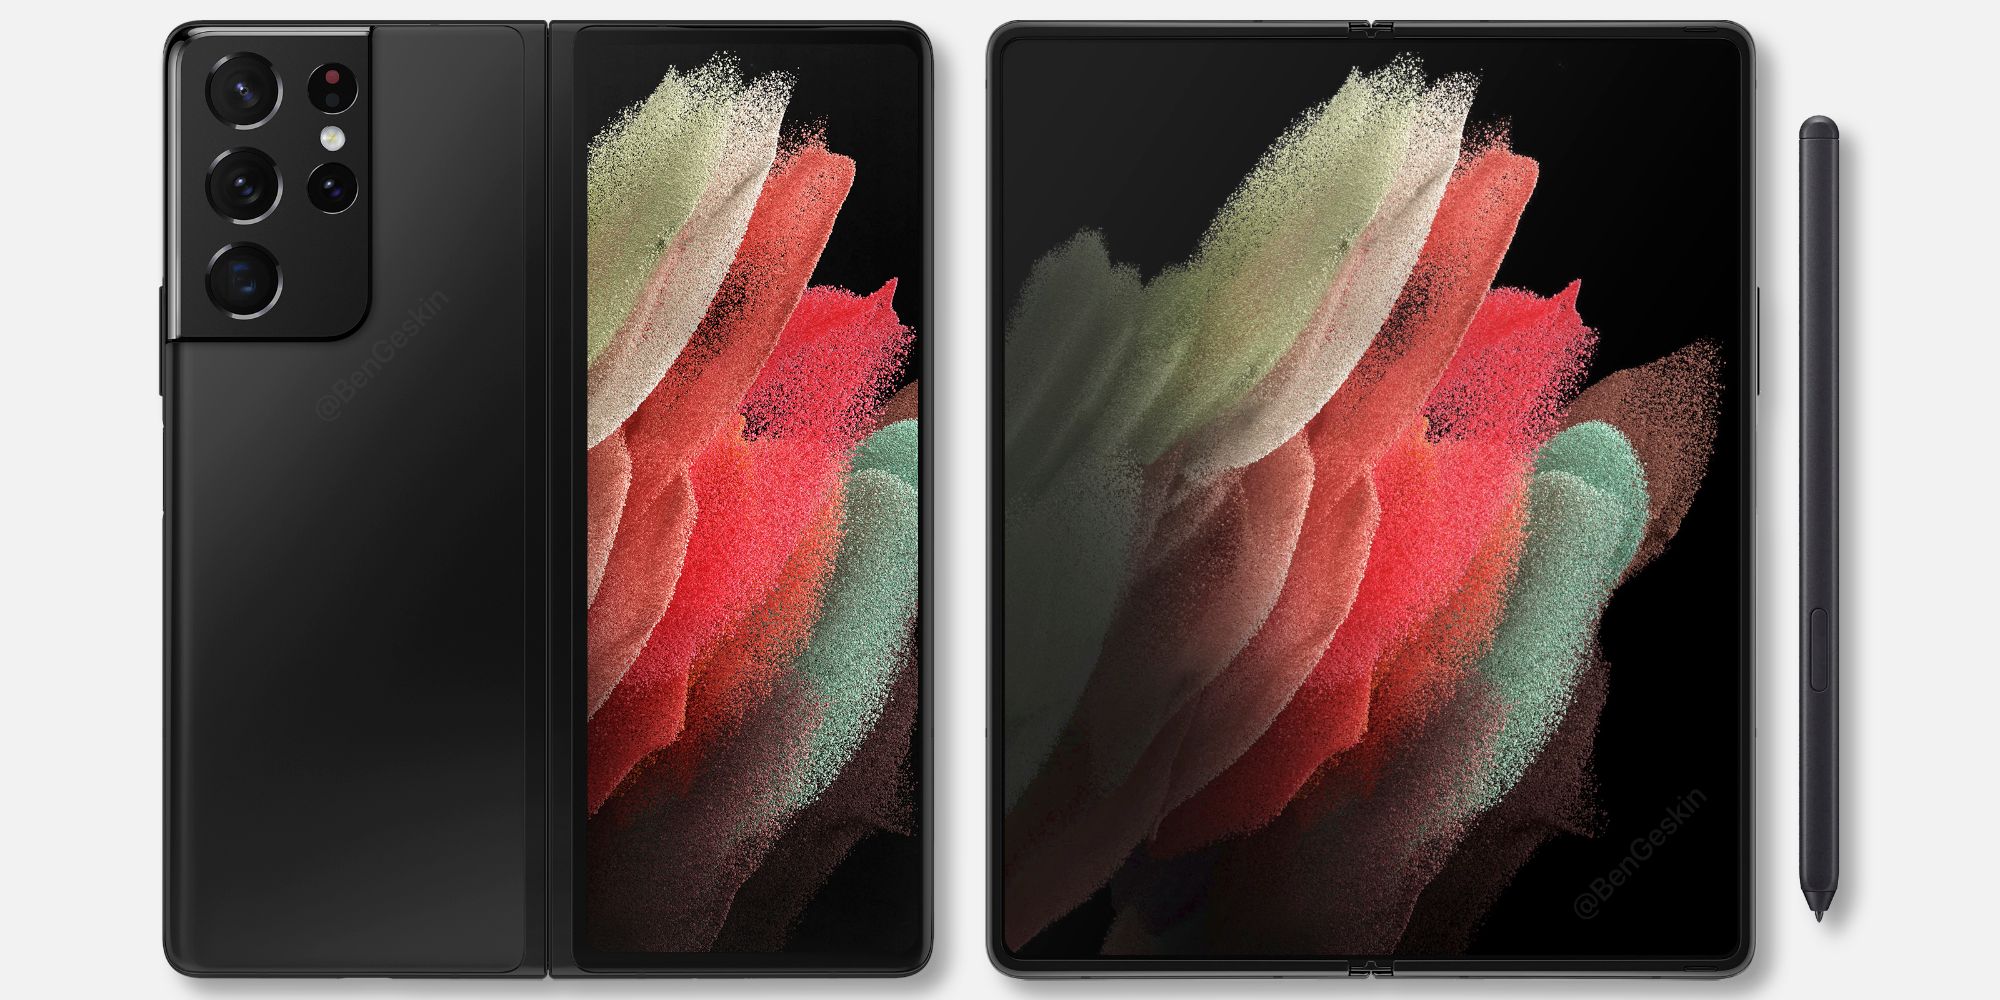 Concept render of the Samsung Galaxy Z Fold 3